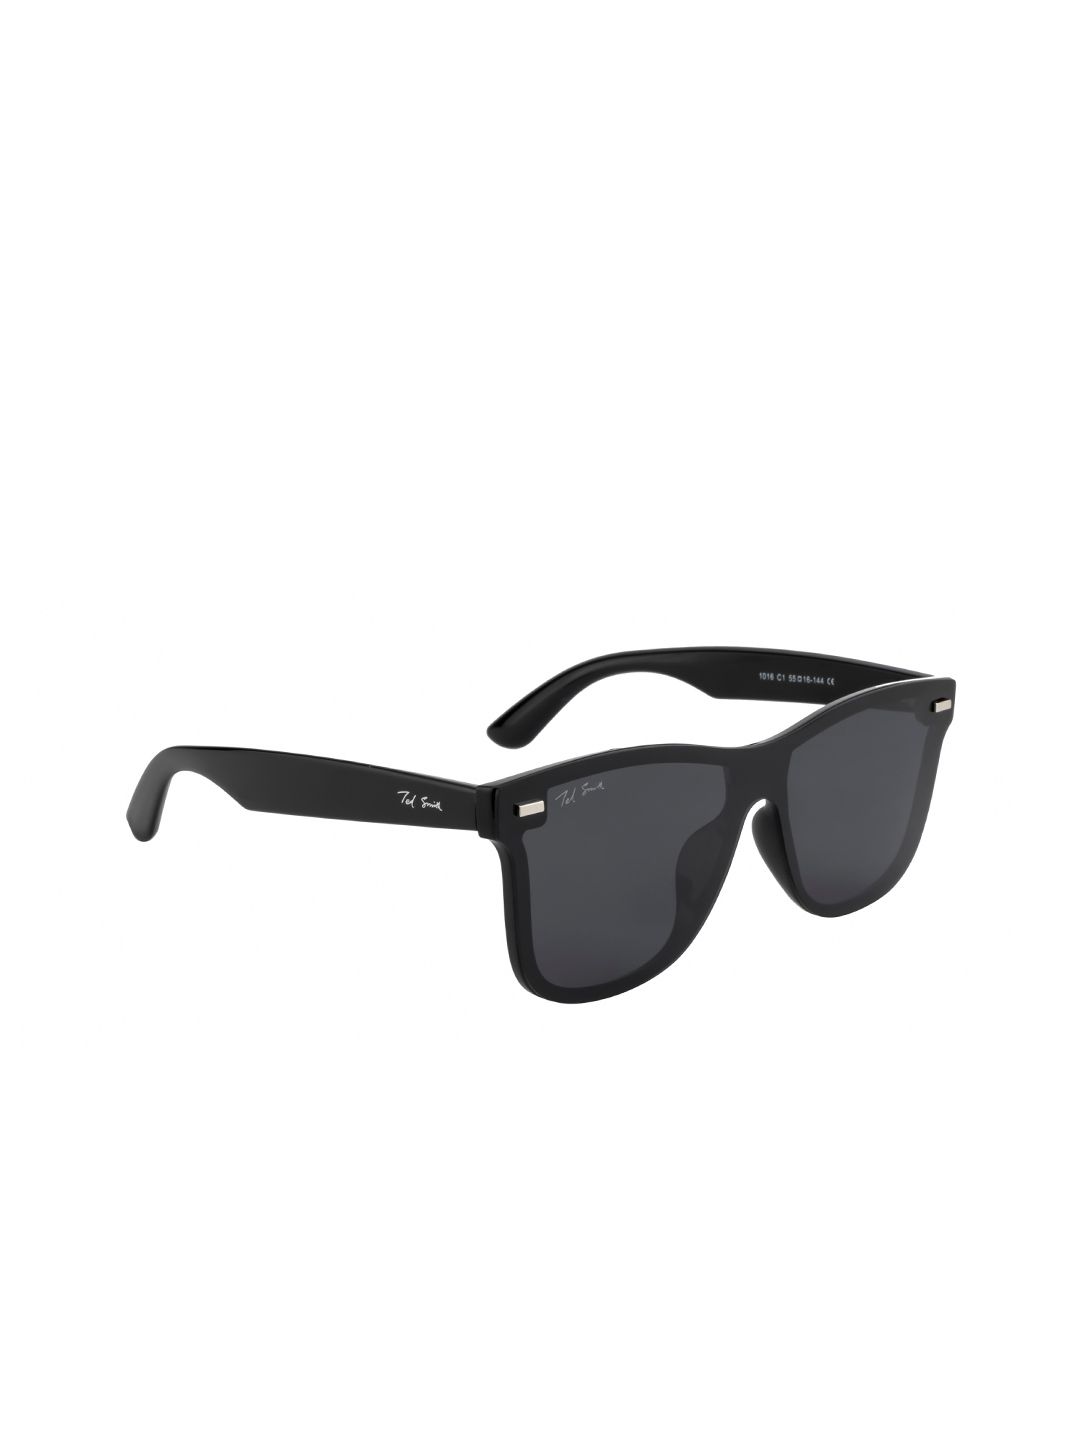 Ted Smith Unisex Black Lens & Black Wayfarer Sunglasses with Polarised and UV Protected Lens Price in India